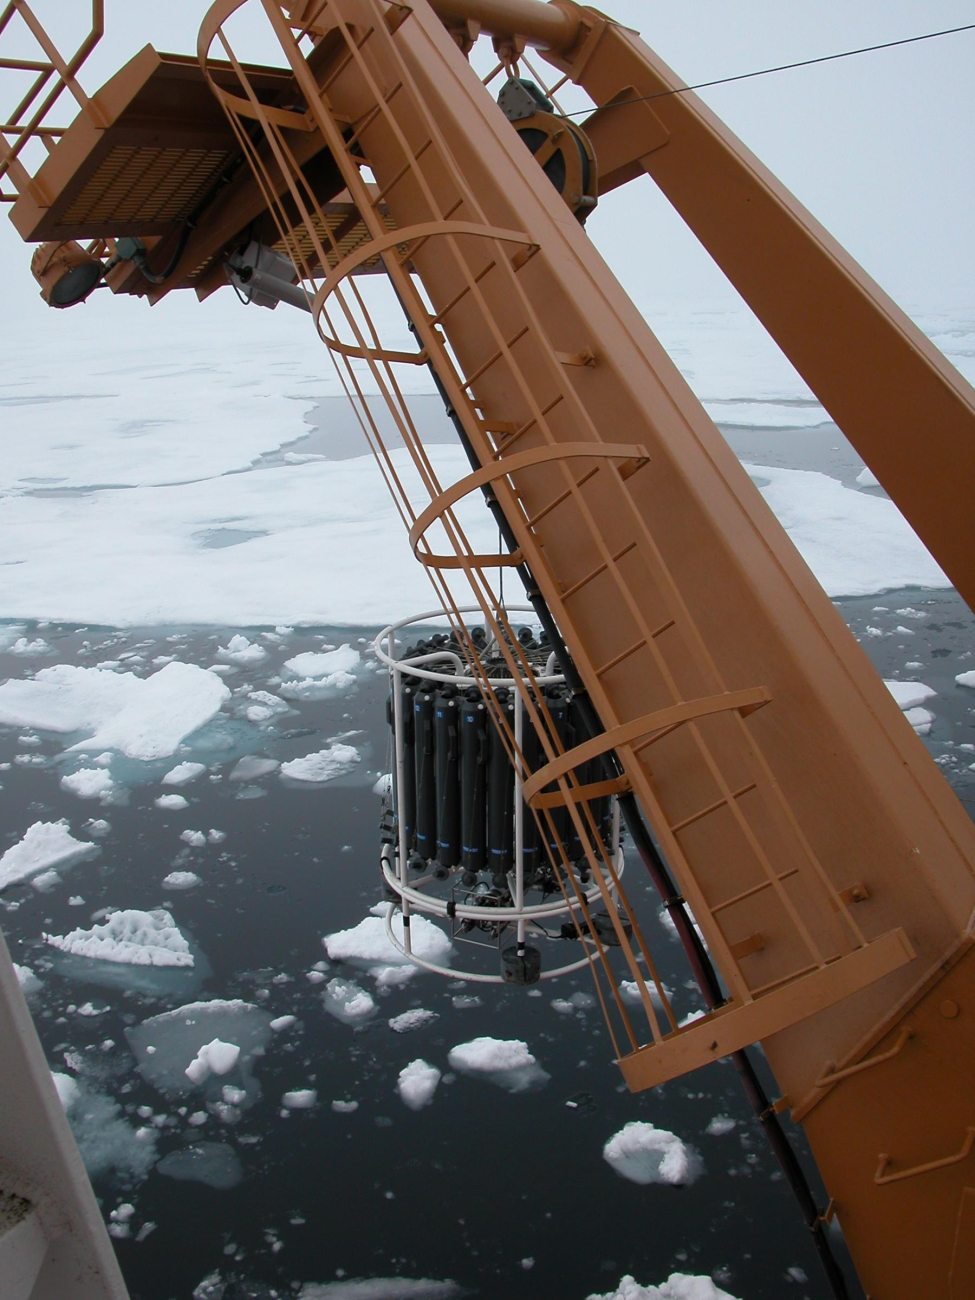 A CTD cast and rosette full of water sampling containers are lowered into icyArctic waters during the NOAA-sponsored cruise to study marine life in theCanada Basin of the Arctic Ocean